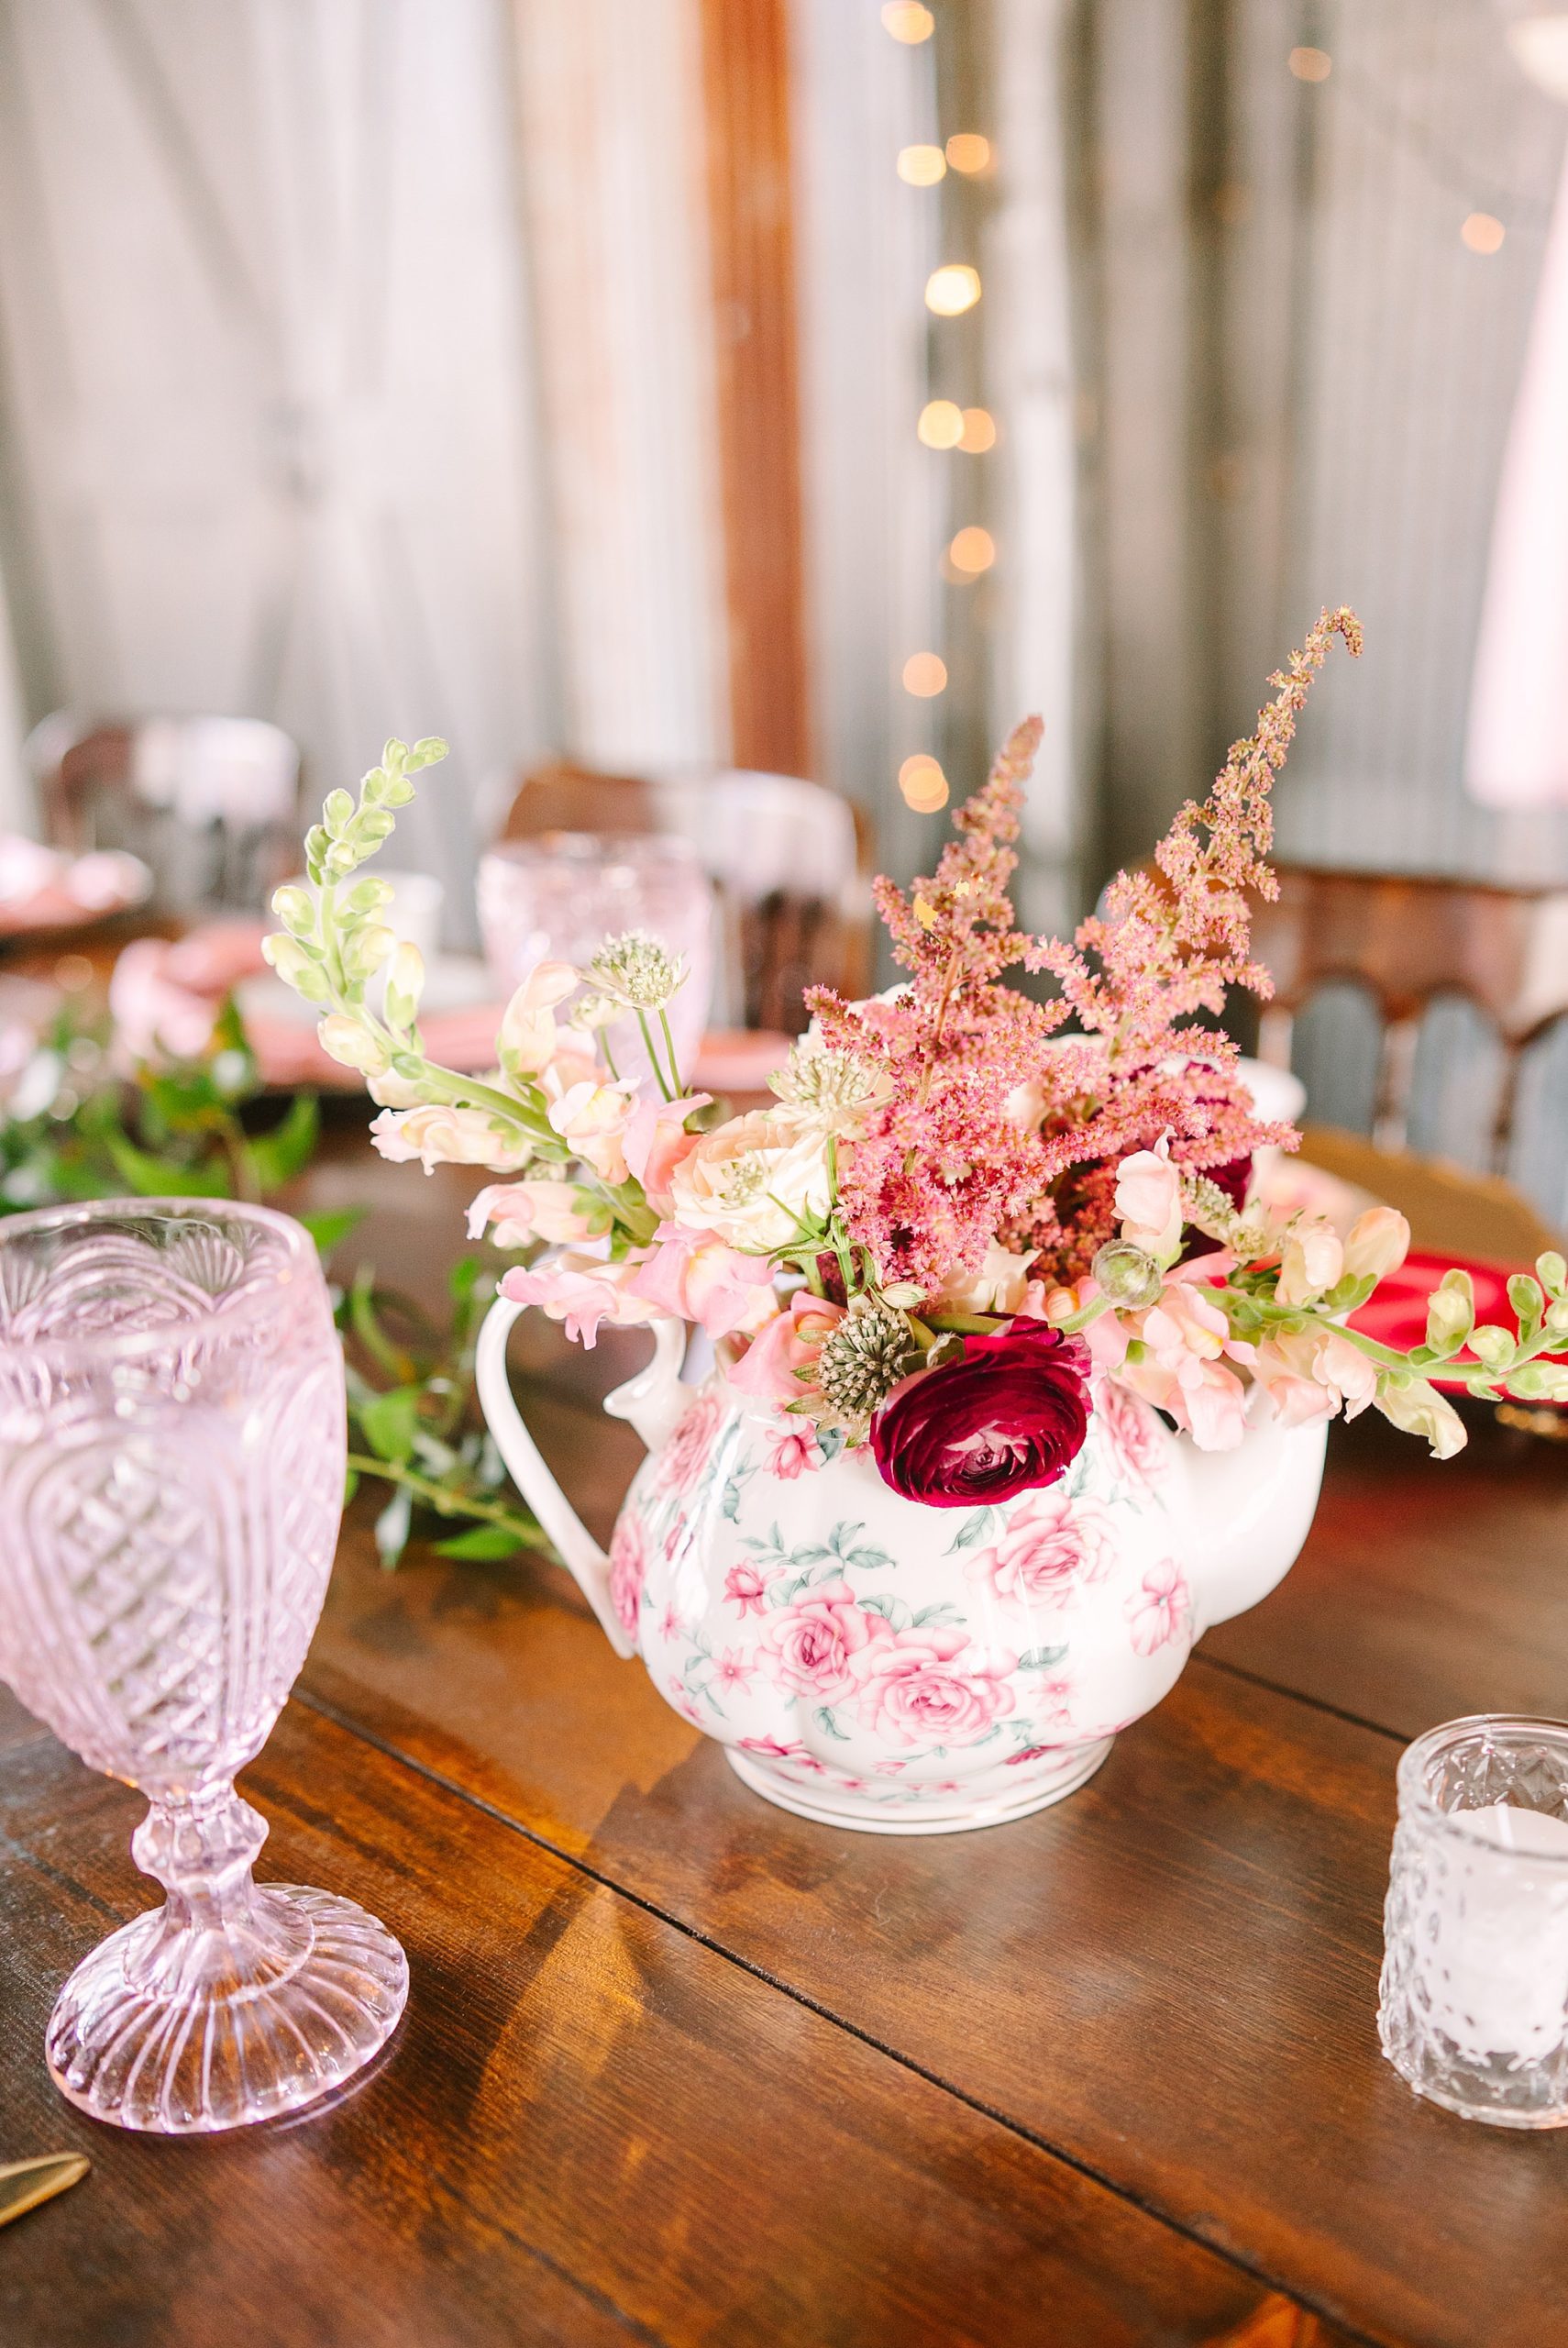 centerpieces with pink flowers inside tea pot for tea party